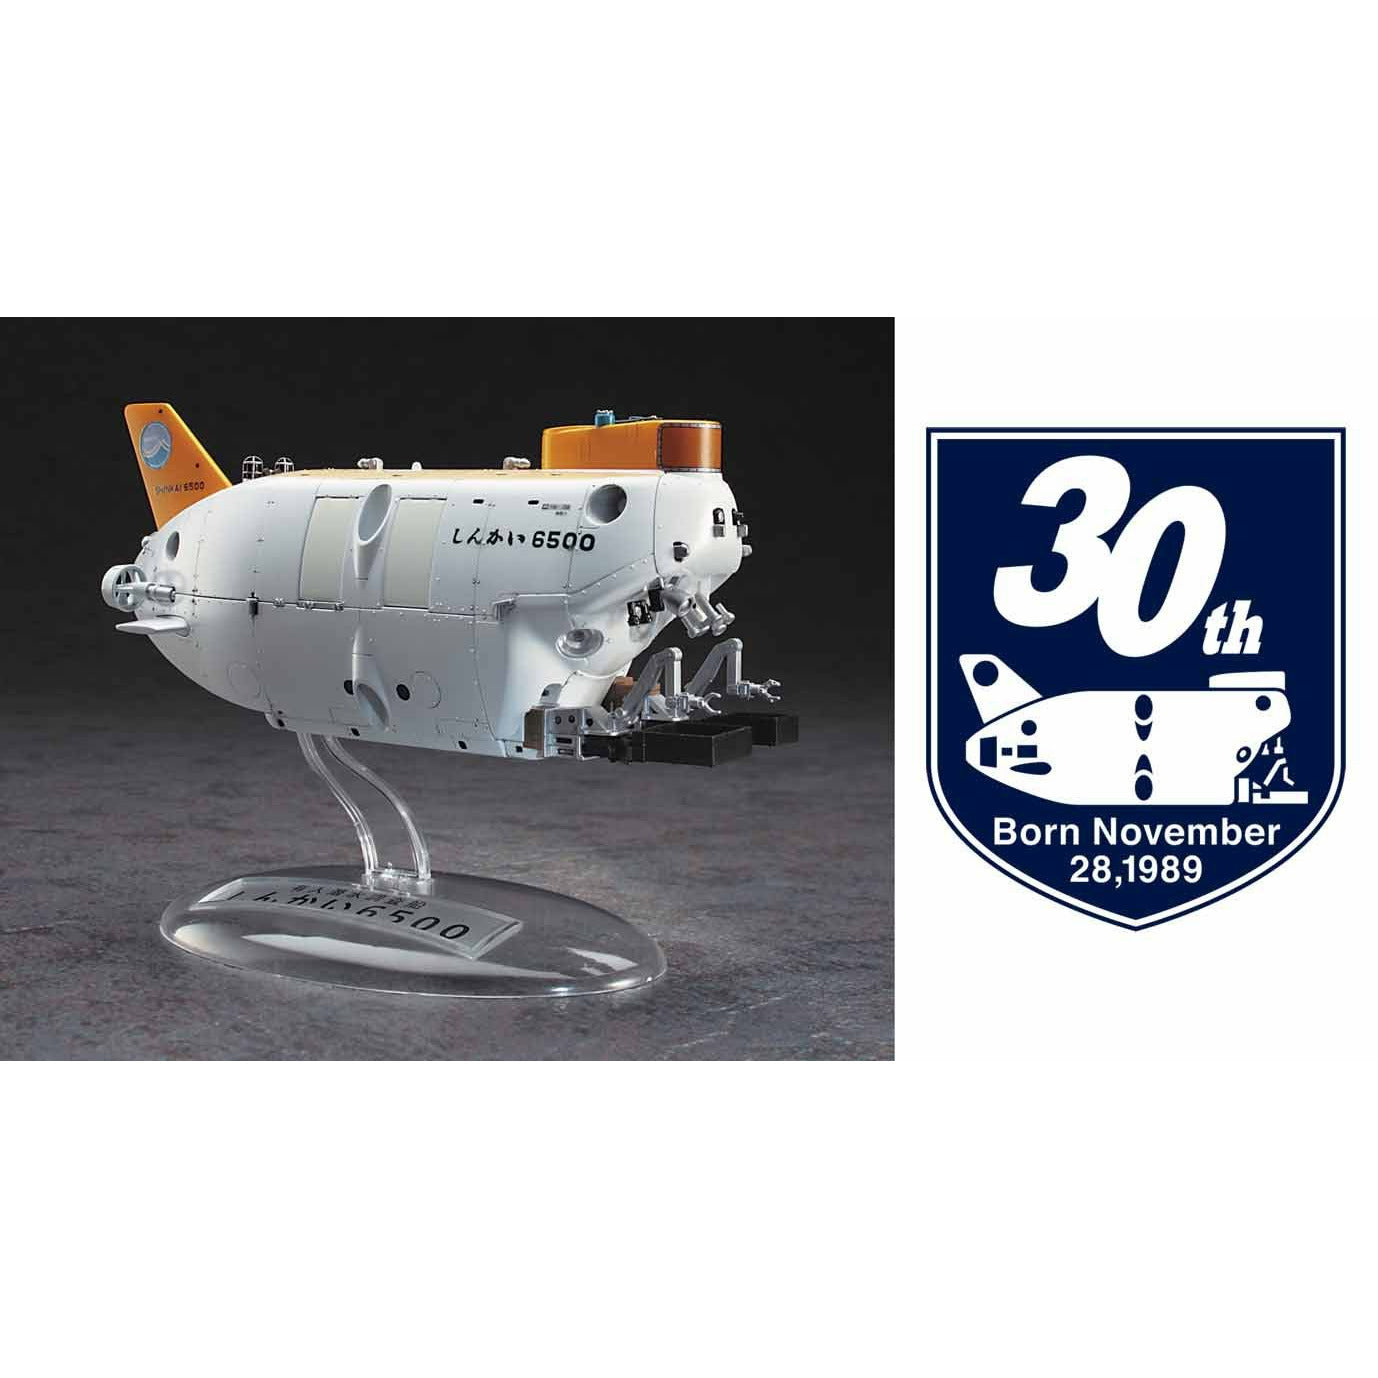 Manned Research Submersible Shinkai 6500 W/ Completion 30th Anniversary Wappen 1/72 Model Submarine Kit #SP492 by Hasegawa